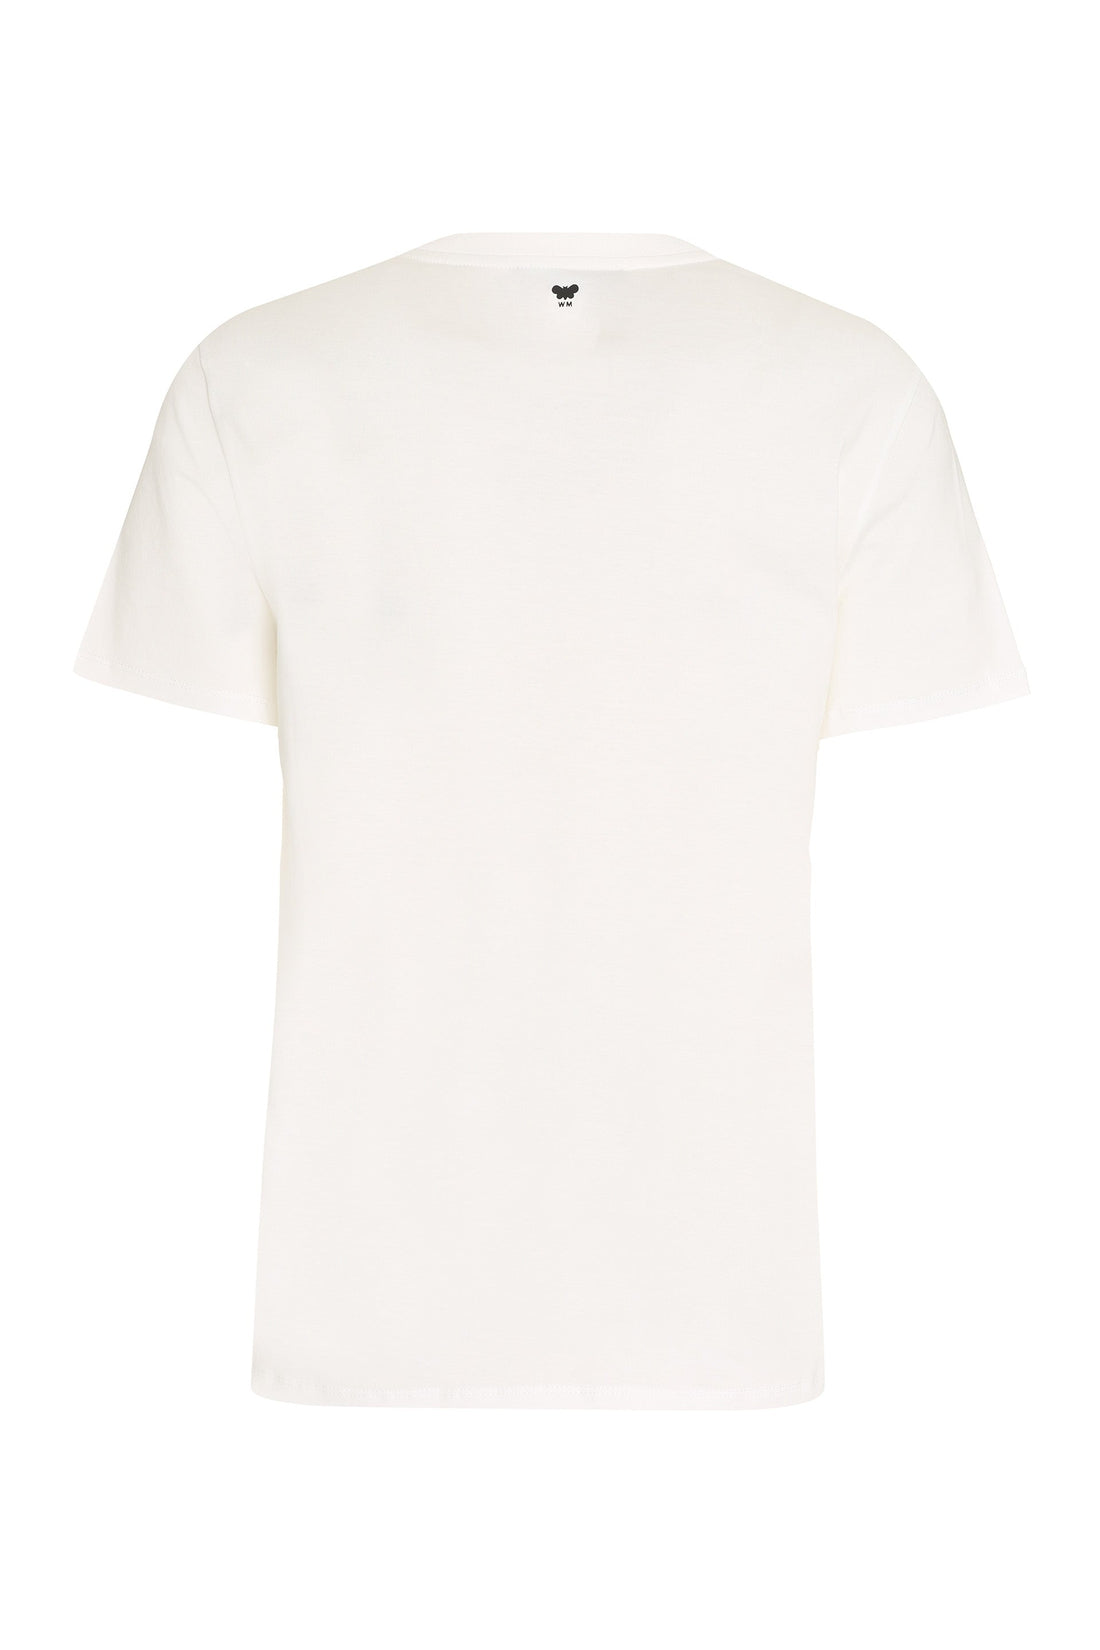 Weekend Max Mara-OUTLET-SALE-Murano T-shirt printed cotton-ARCHIVIST